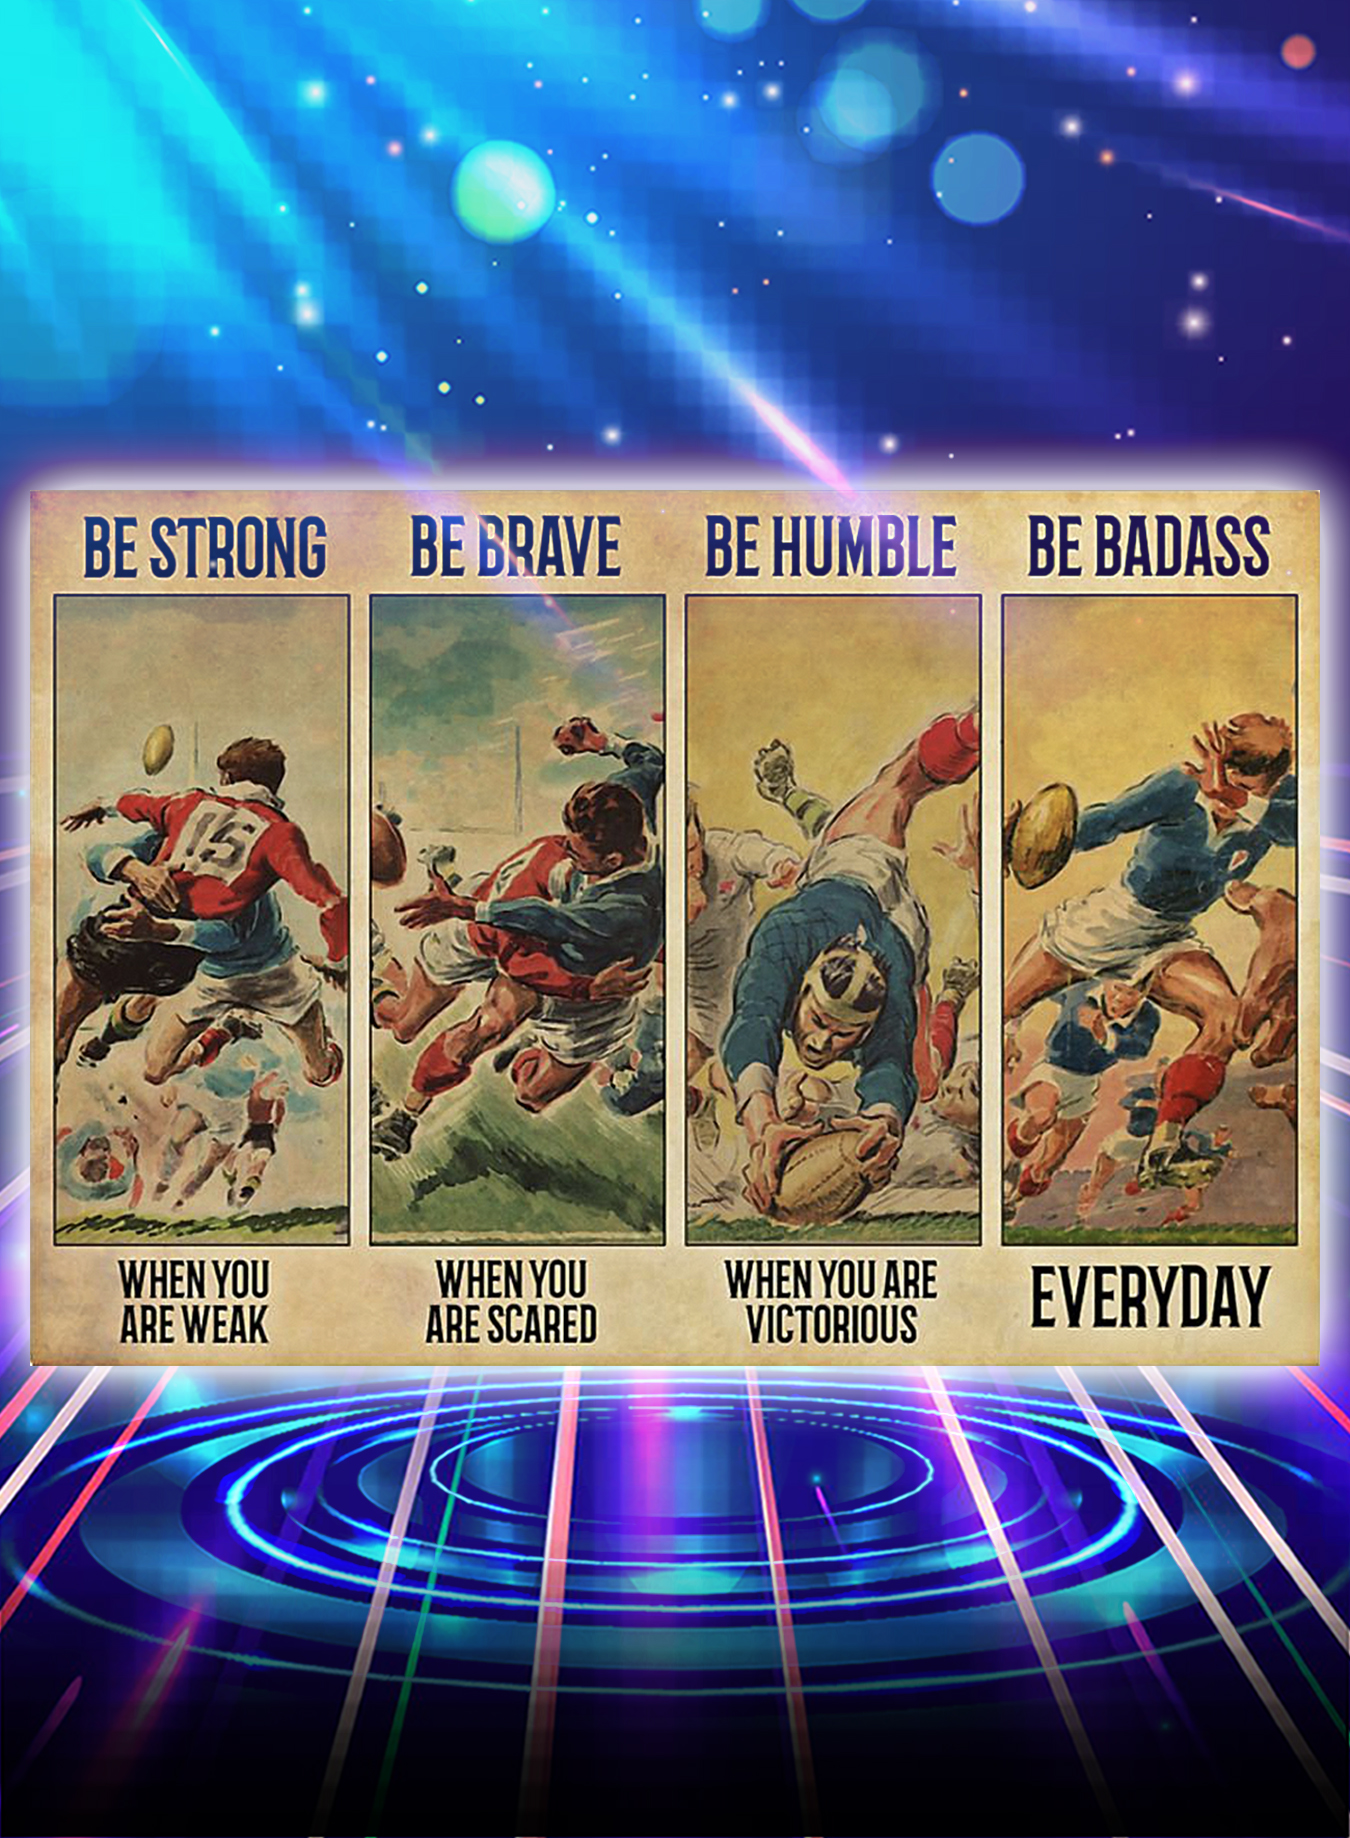 Rugby be strong be brave be humble be badass poster - A3